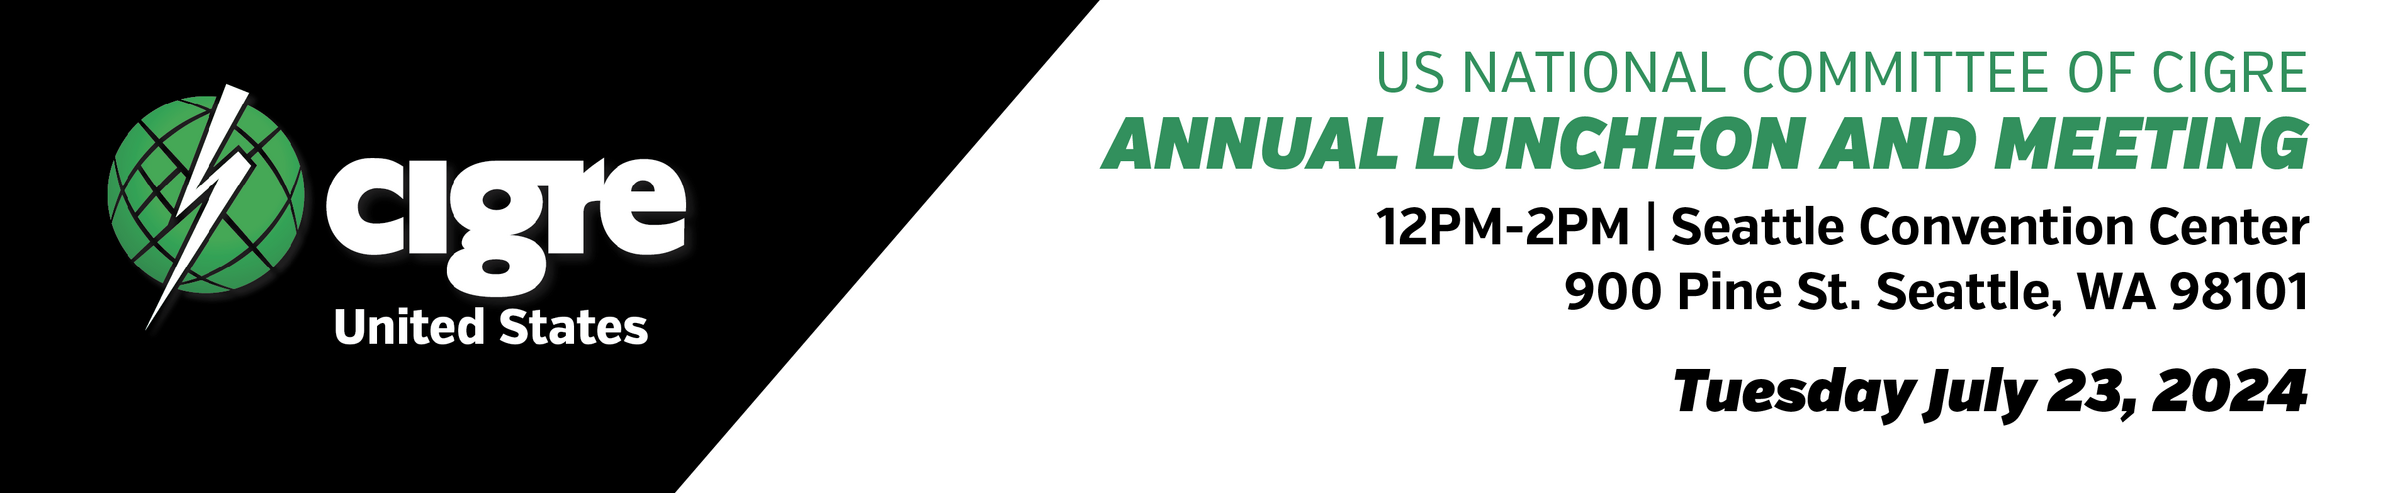 CIGRE USNC Annual Meeting and Luncheon - 2024